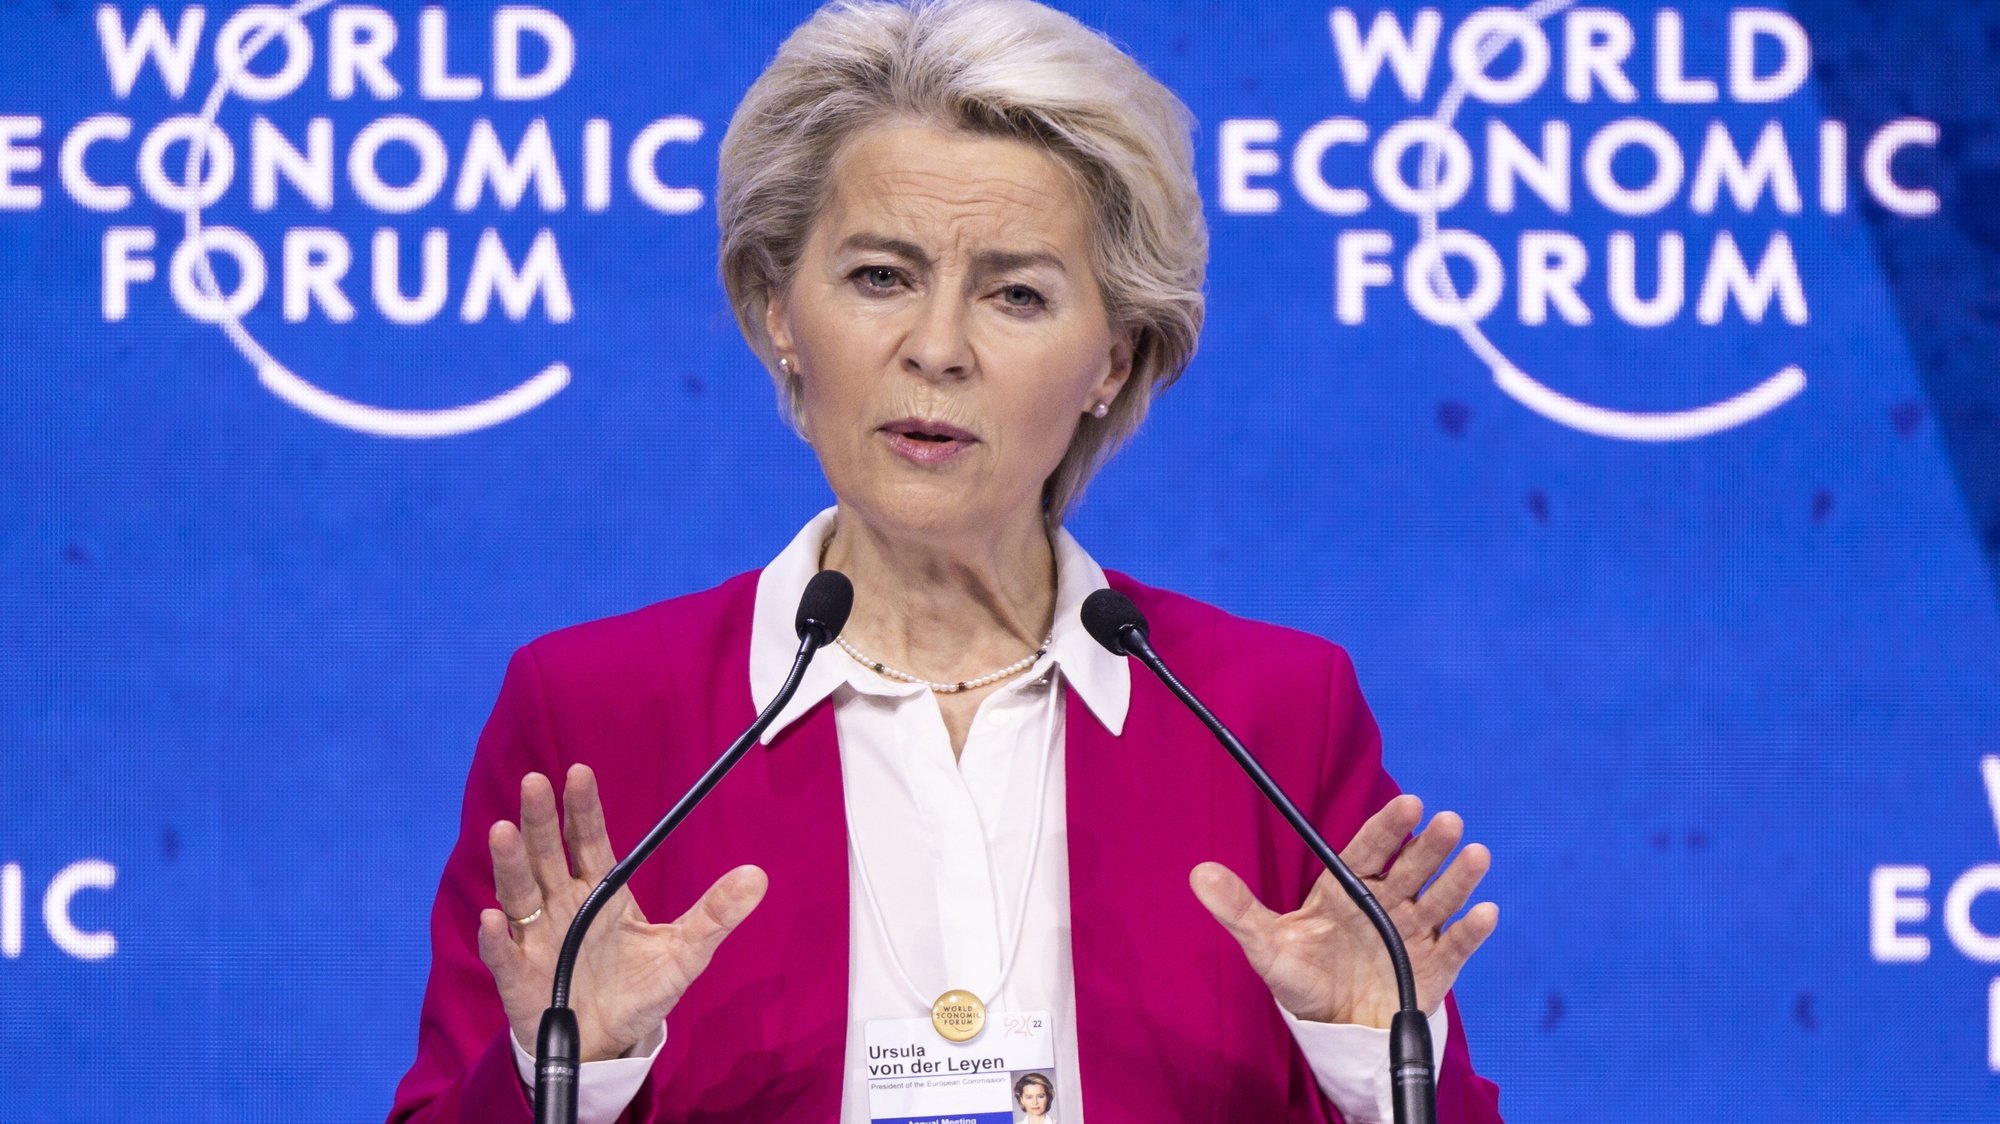 epa09971135 Ursula von der Leyen, President of the European Commission addresses a plenary session during the 51st annual meeting of the World Economic Forum, WEF, in Davos, Switzerland, 24 May 2022. The forum has been postponed due to the COVID-19 pandemic and was rescheduled to early summer. The meeting brings together entrepreneurs, scientists, corporate and political leaders in Davos under the topic &#039;History at a Turning Point: Government Policies and Business Strategies&#039; from 22 to 26 May 2022.  EPA/LAURENT GILLIERON